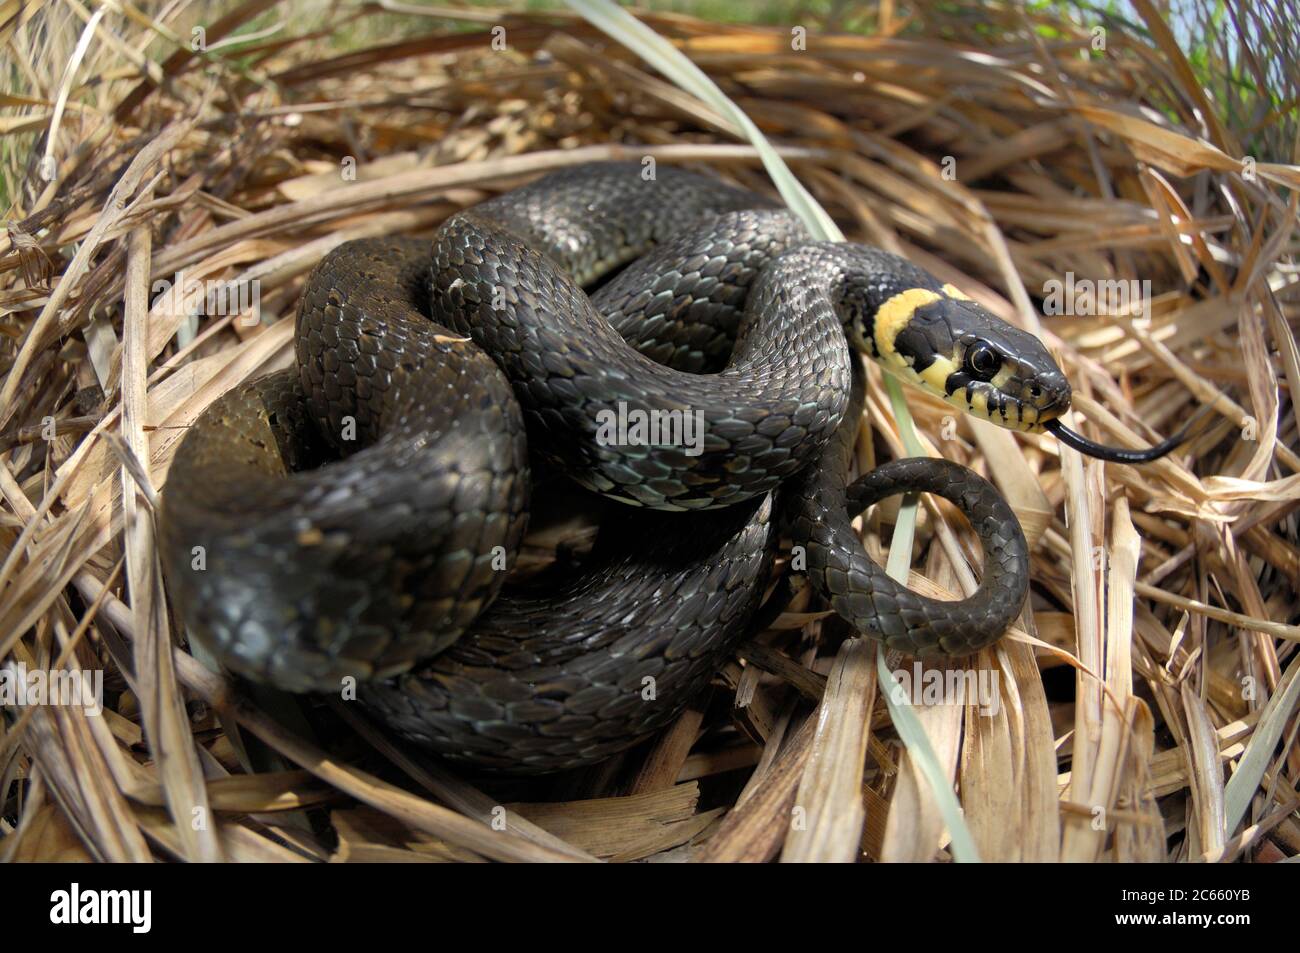 The Grass Snake, sometimes called the Ringed Snake or Water Snake (Natrix natrix) is a European non-venomous snake. Stock Photo